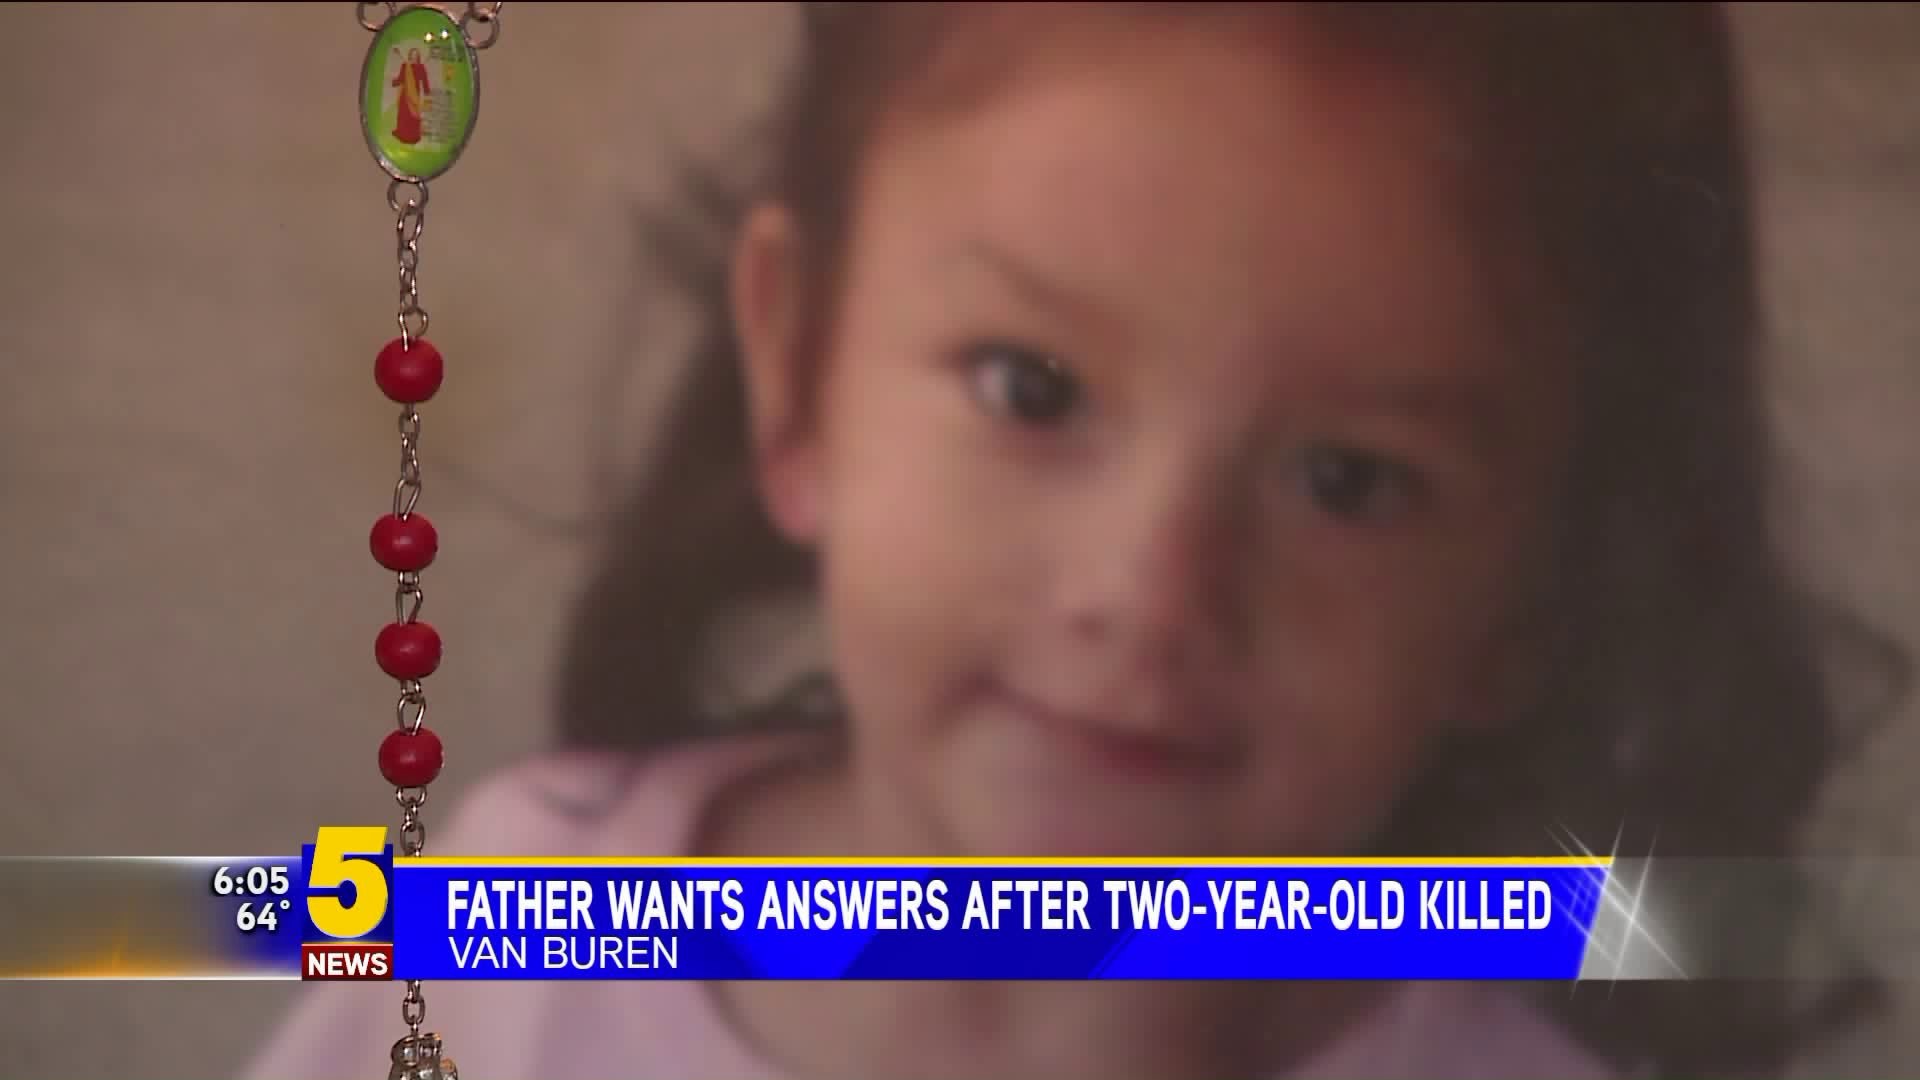 Father Wants Answers After Two-Year-Old Killed in Van Buren